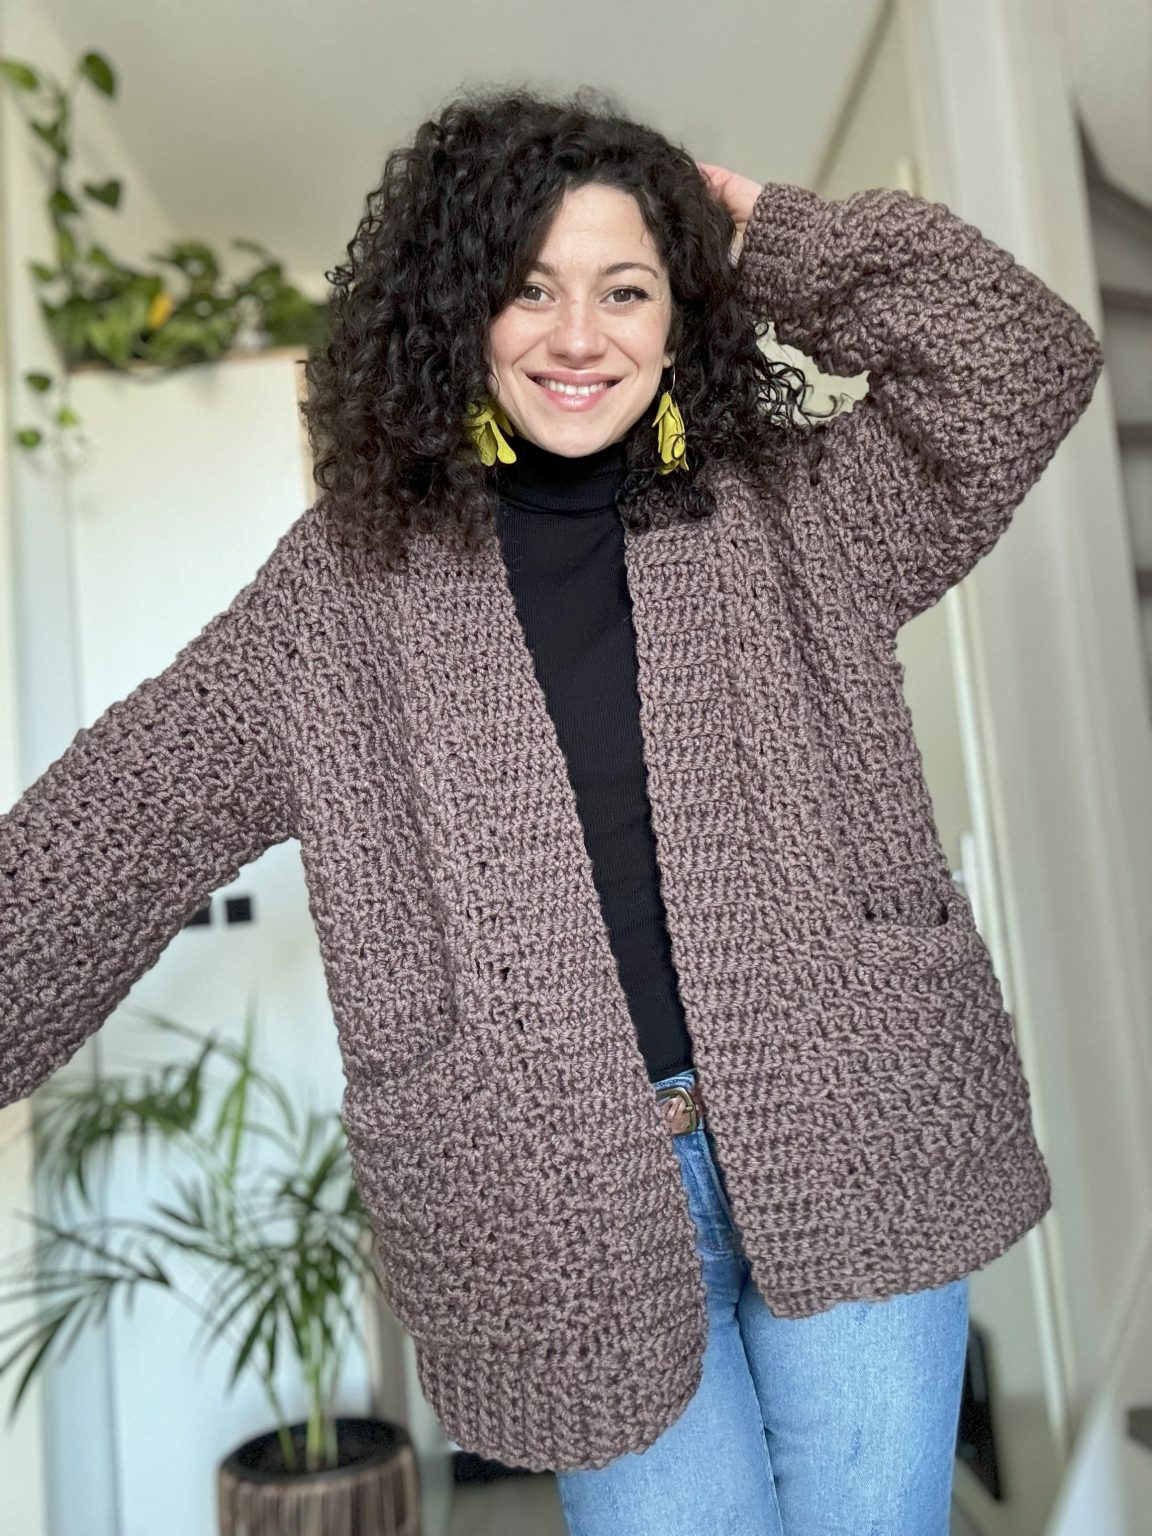 Crochet Your Own Cozy Cardigan – Dare To Be Cozy Cardigan | Free ...